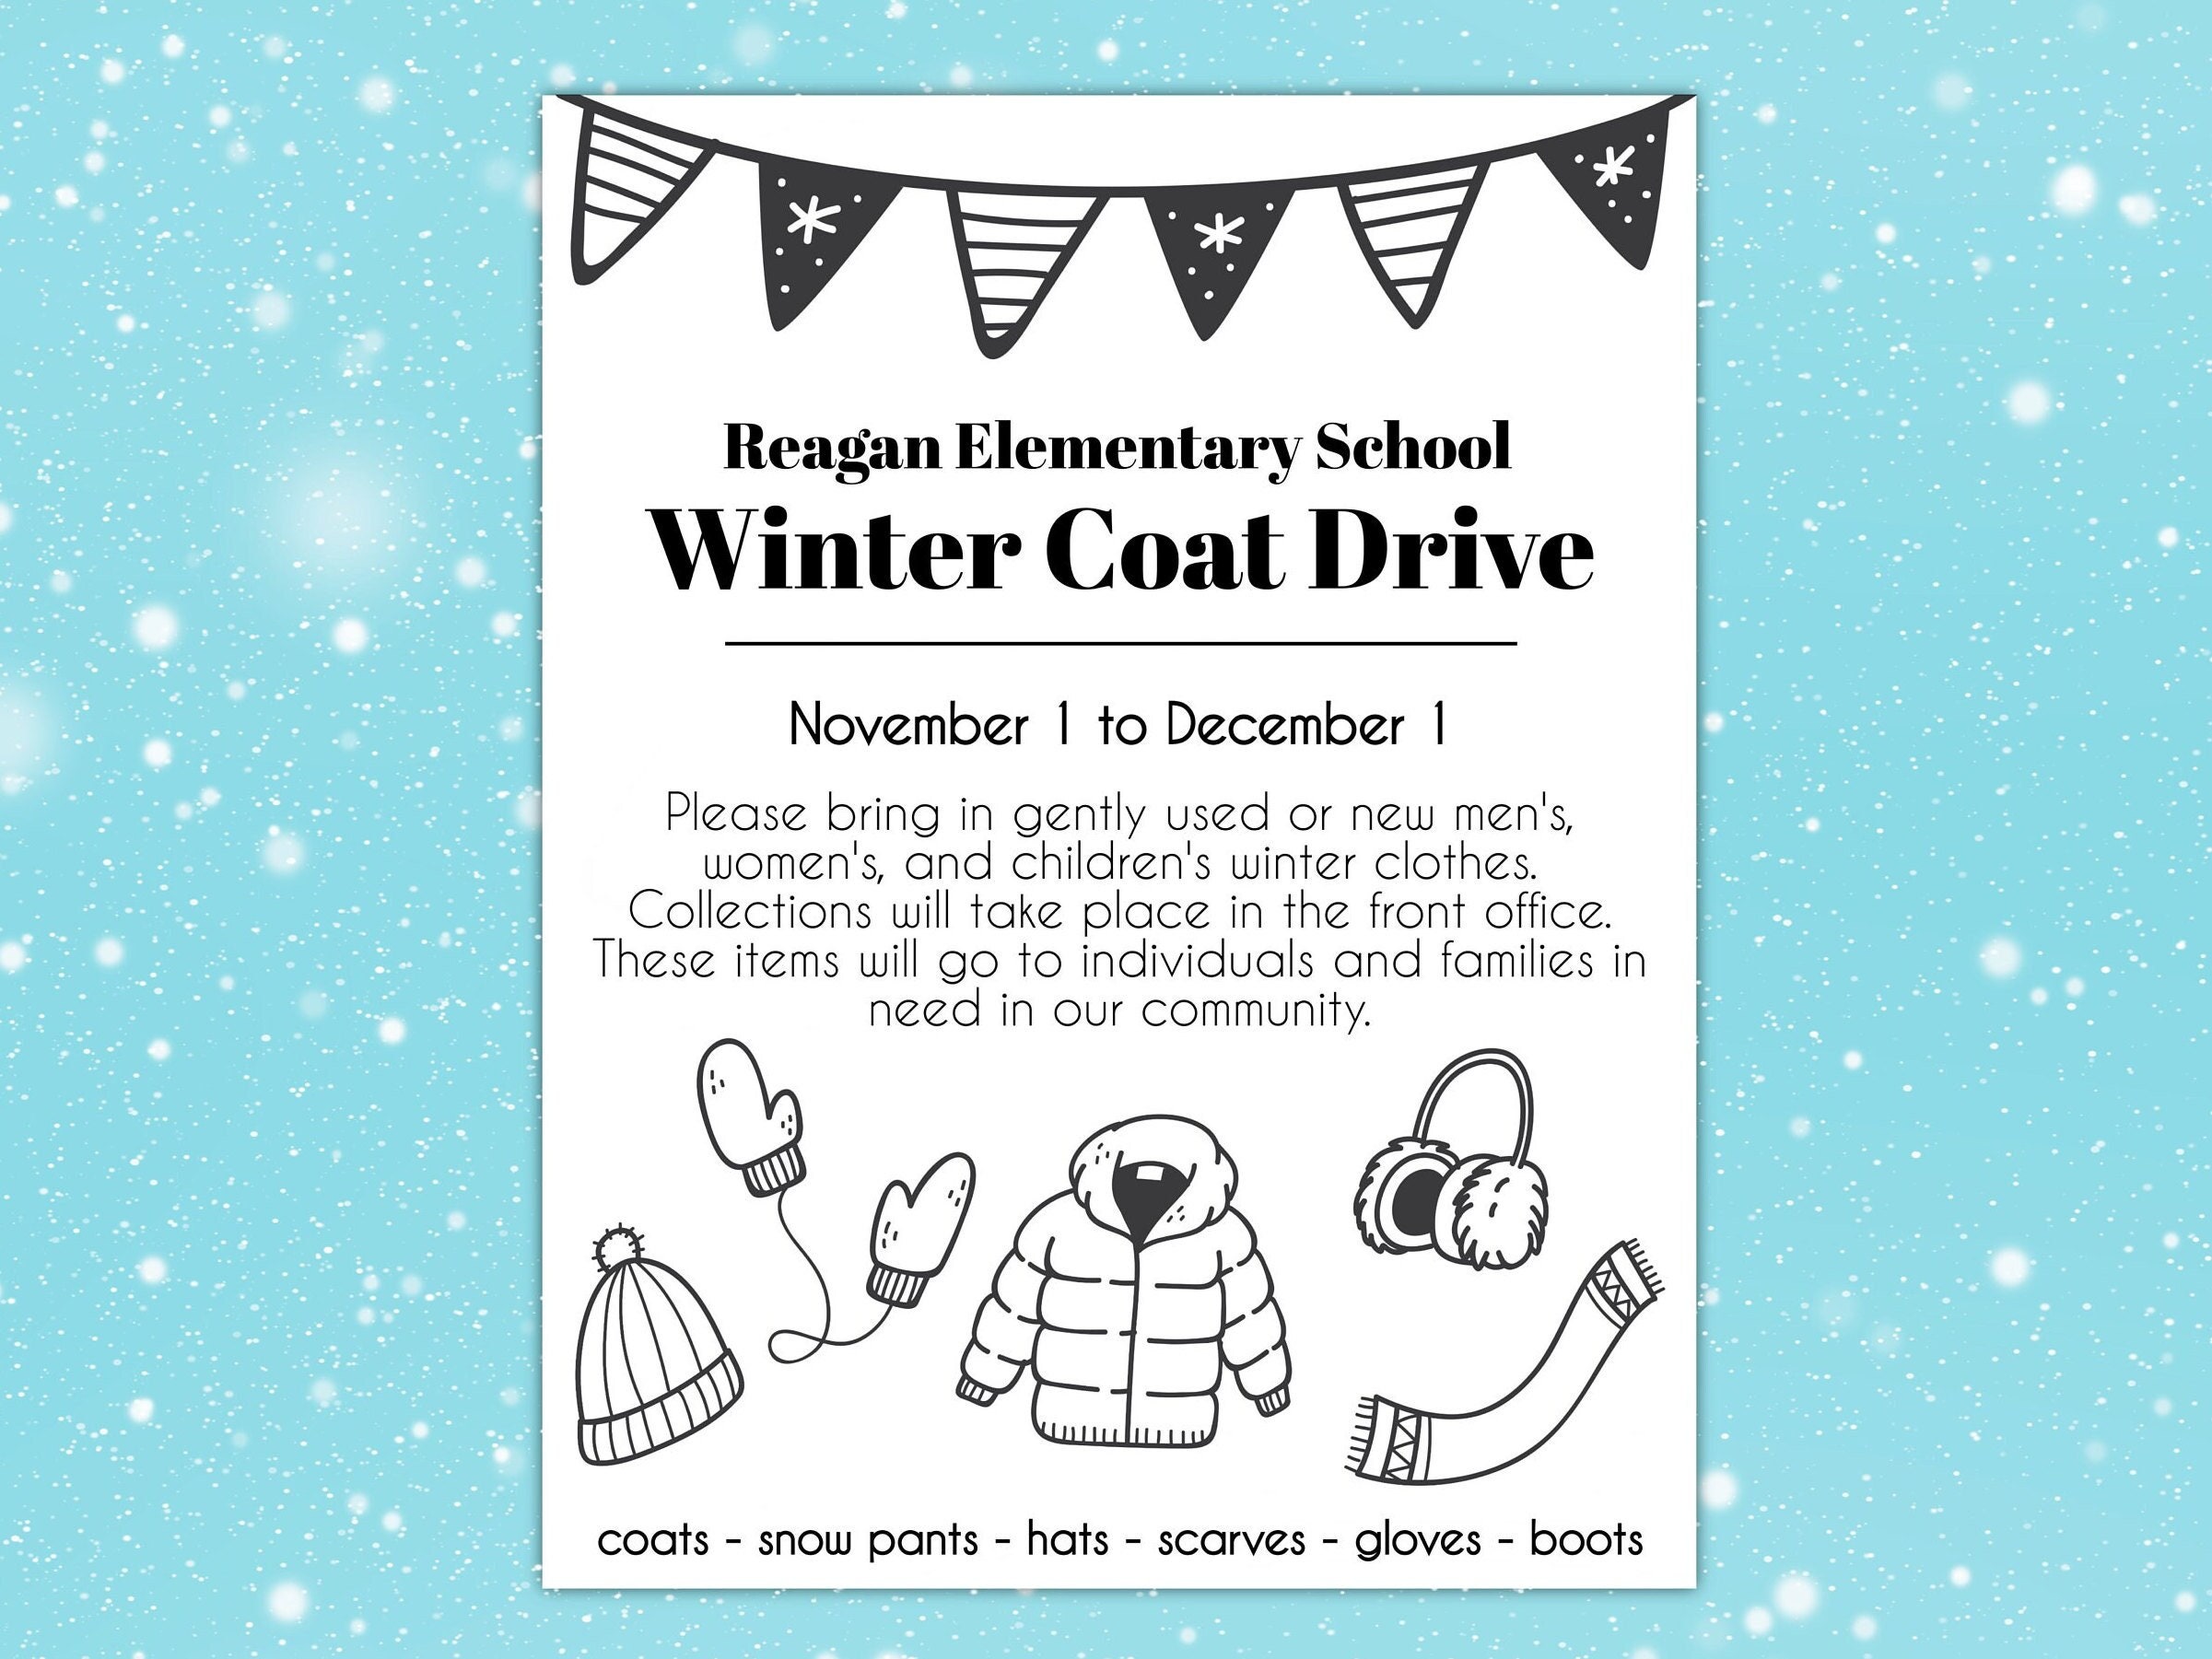 Winter Clothing Drive Customizable School Holiday Event Fundraiser Template